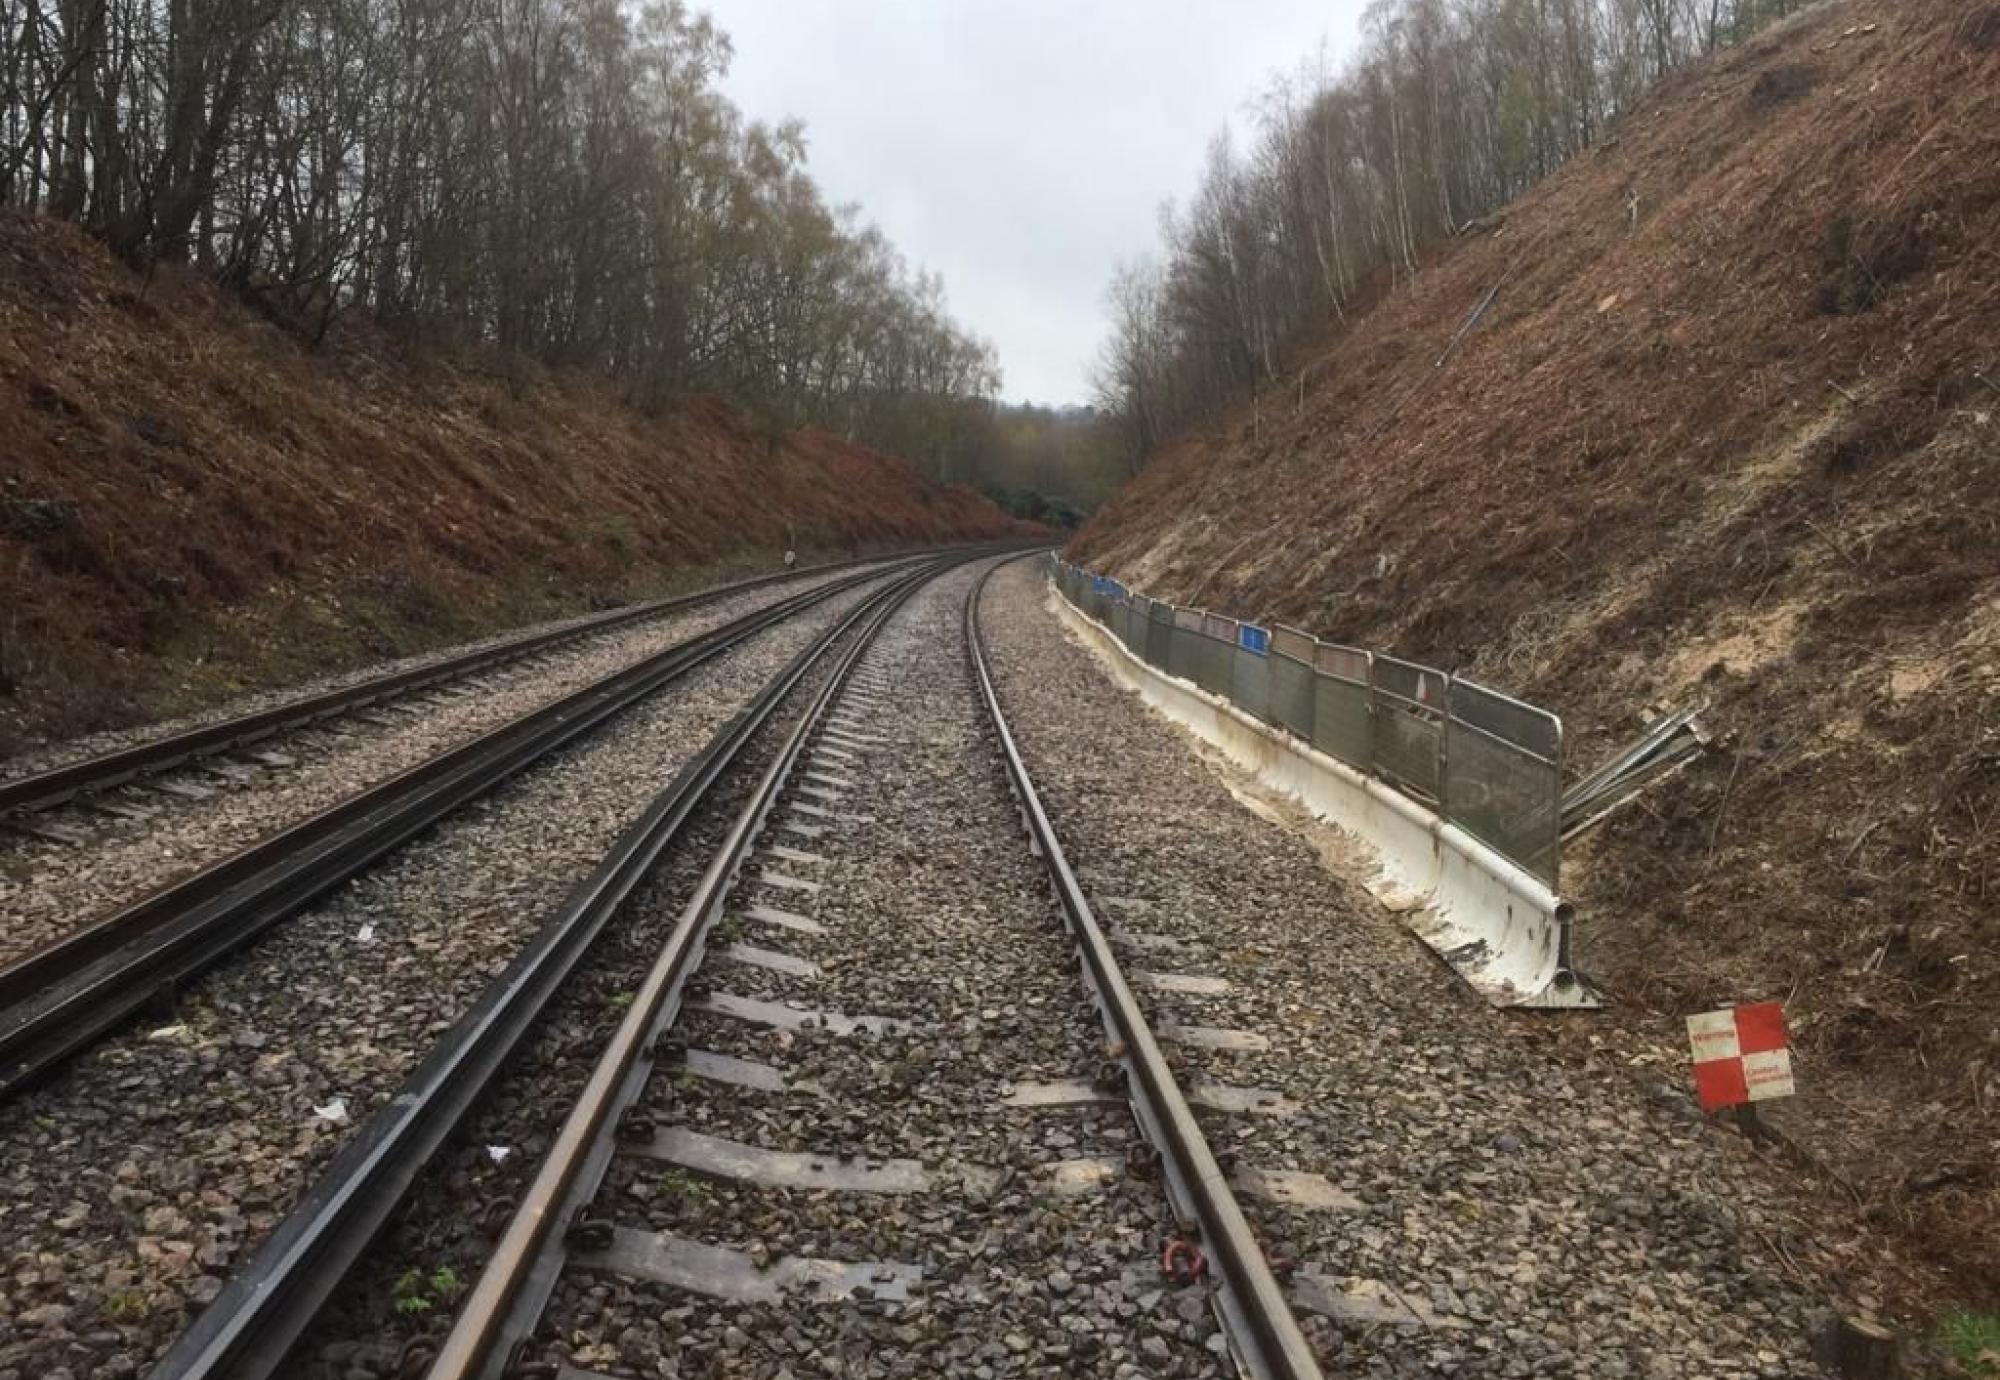 Soil nails and wire mesh have been installed at Snape Wood, via Network Rail 